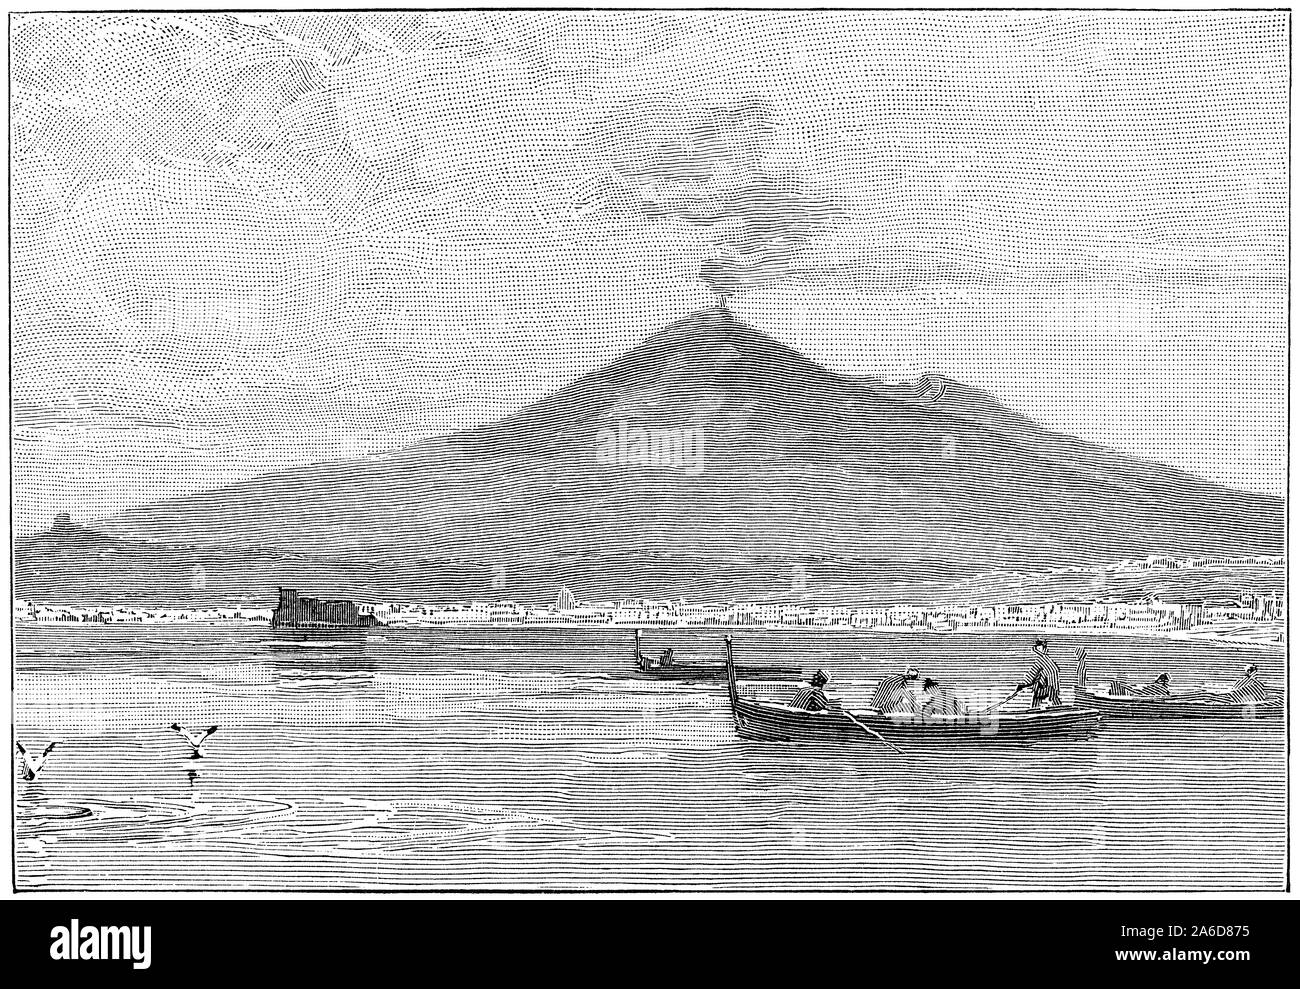 1893 black and white engraving of the volcano Mount Vesuvius and the Gulf Of Naples, Italy. Stock Photo